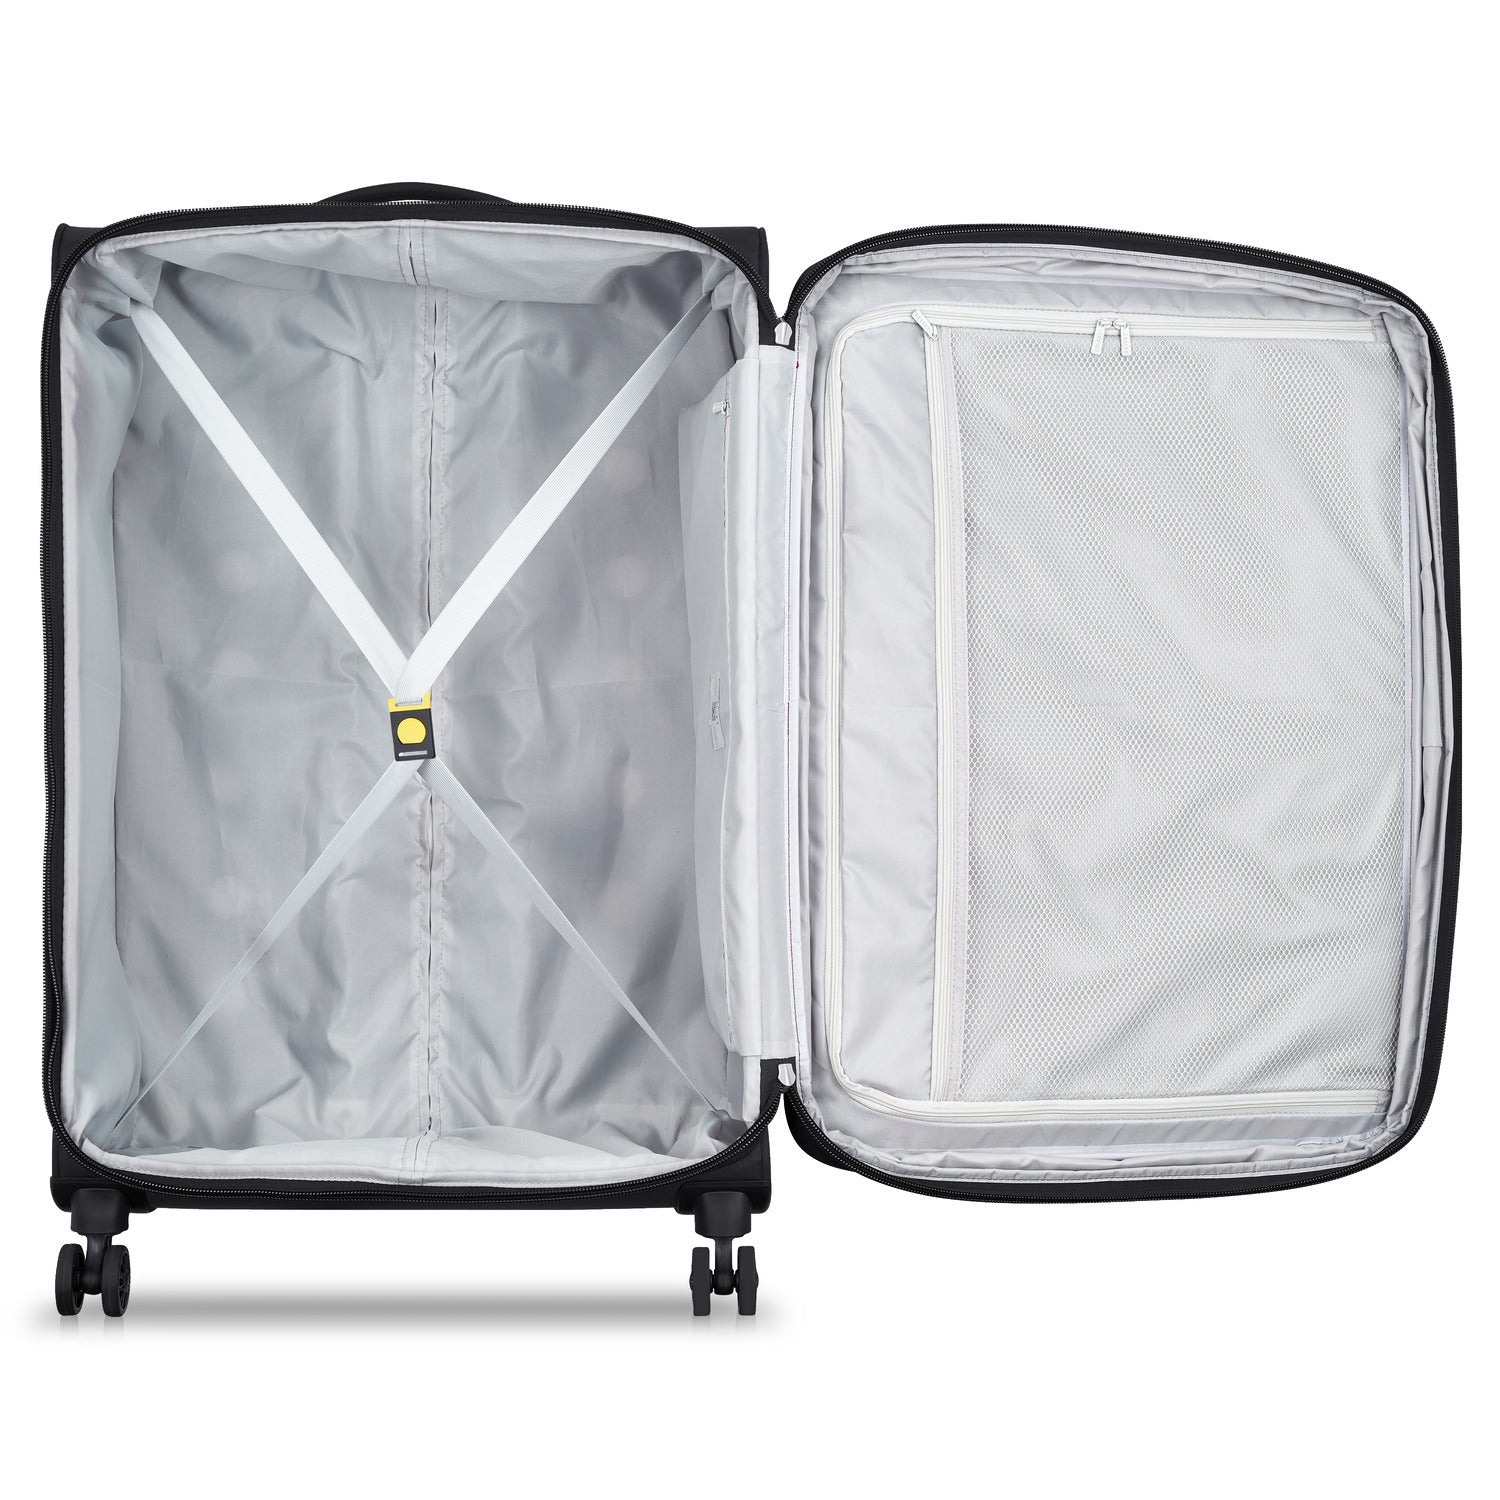 Delsey Pin Up 6 78cm Softcase 4 Double Wheel Expandable Check-In Trolley Case Black - 00343082100